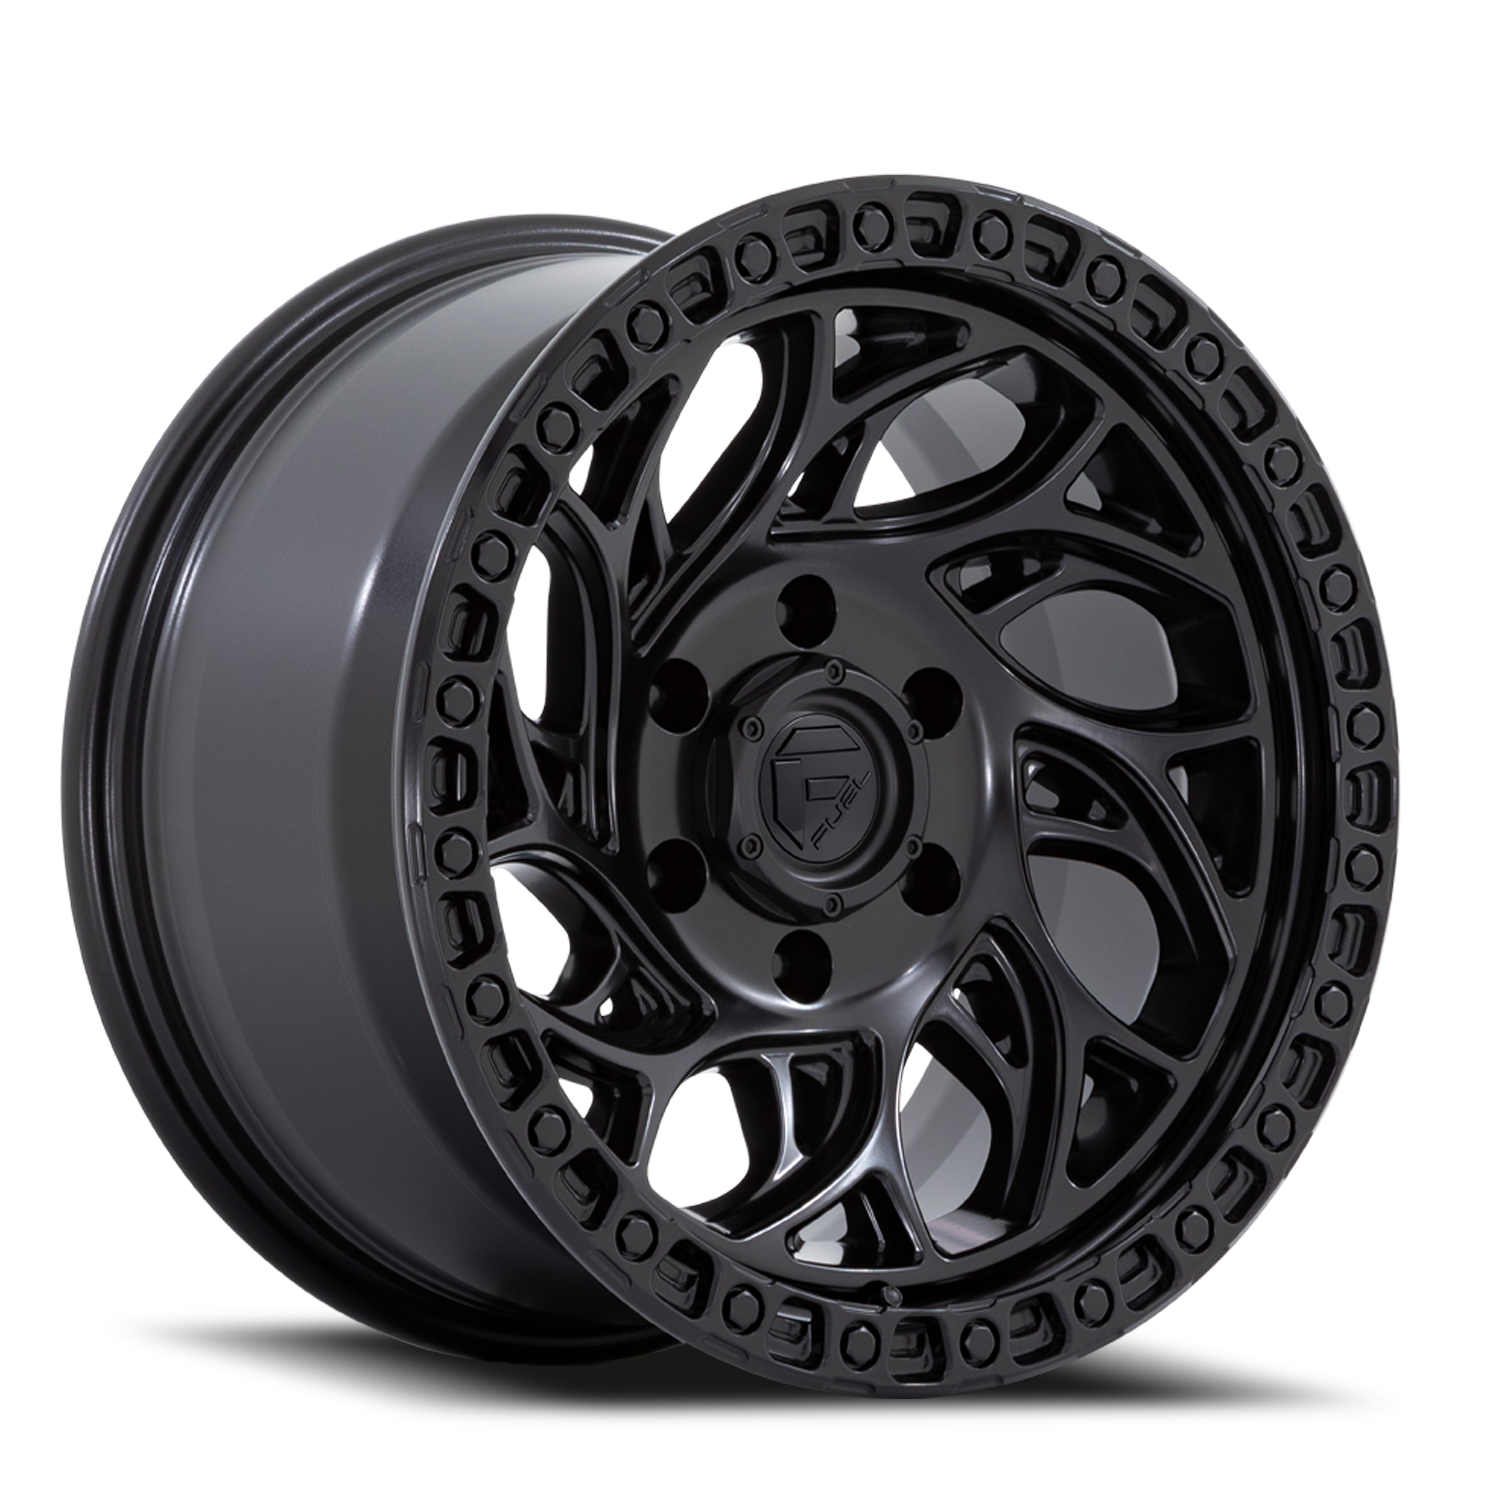 Aluminum Wheels 18X9 Runner OR D852 6 On 135 Blackout 87.1 Bore 1 Offset Fuel Off Road Wheels